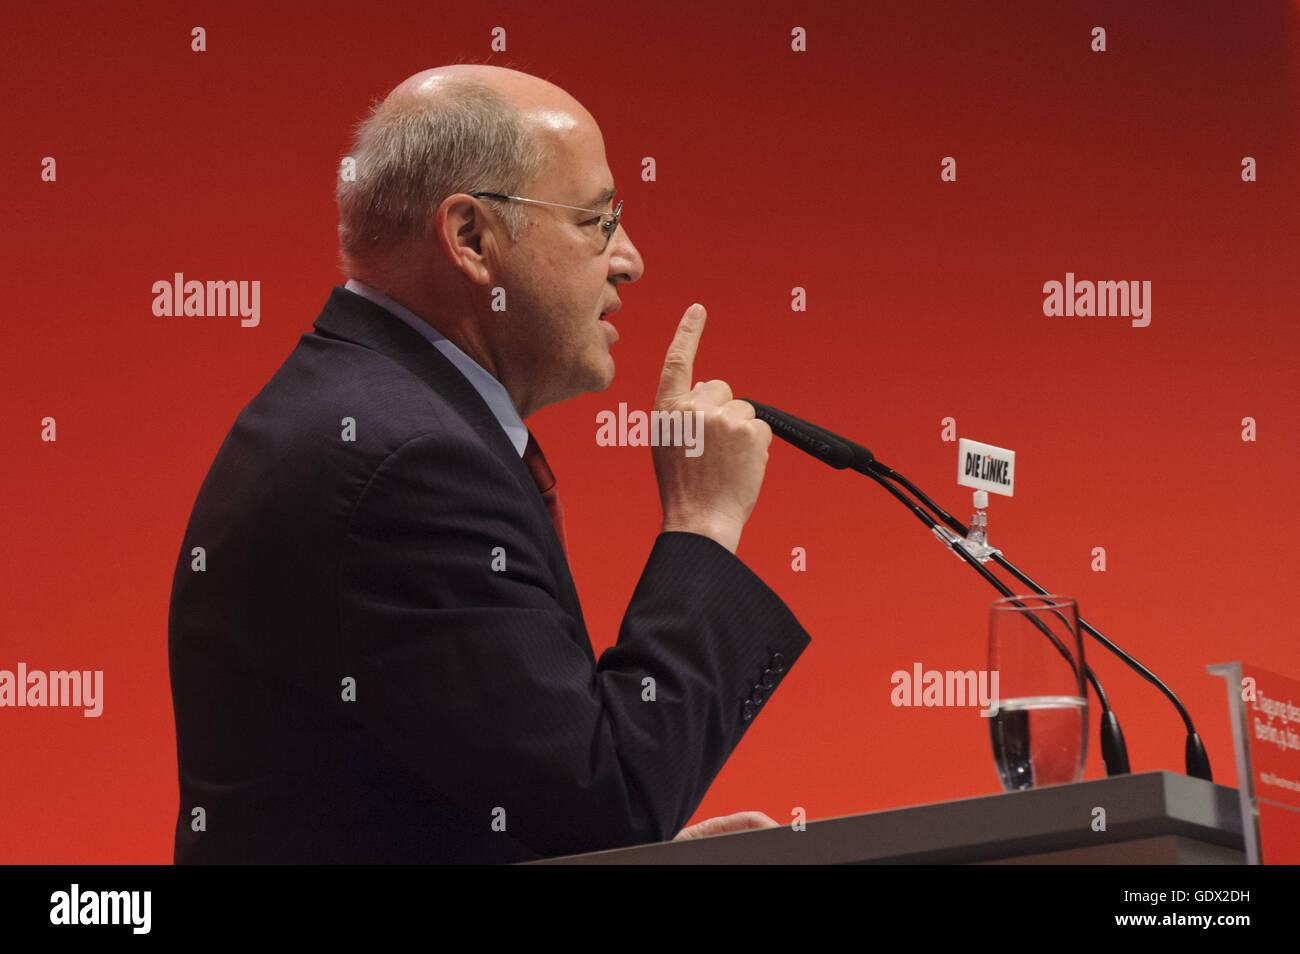 Parliamentary Party Leader Gregor Gysi in Berlin, Germany, 2014 Stock Photo